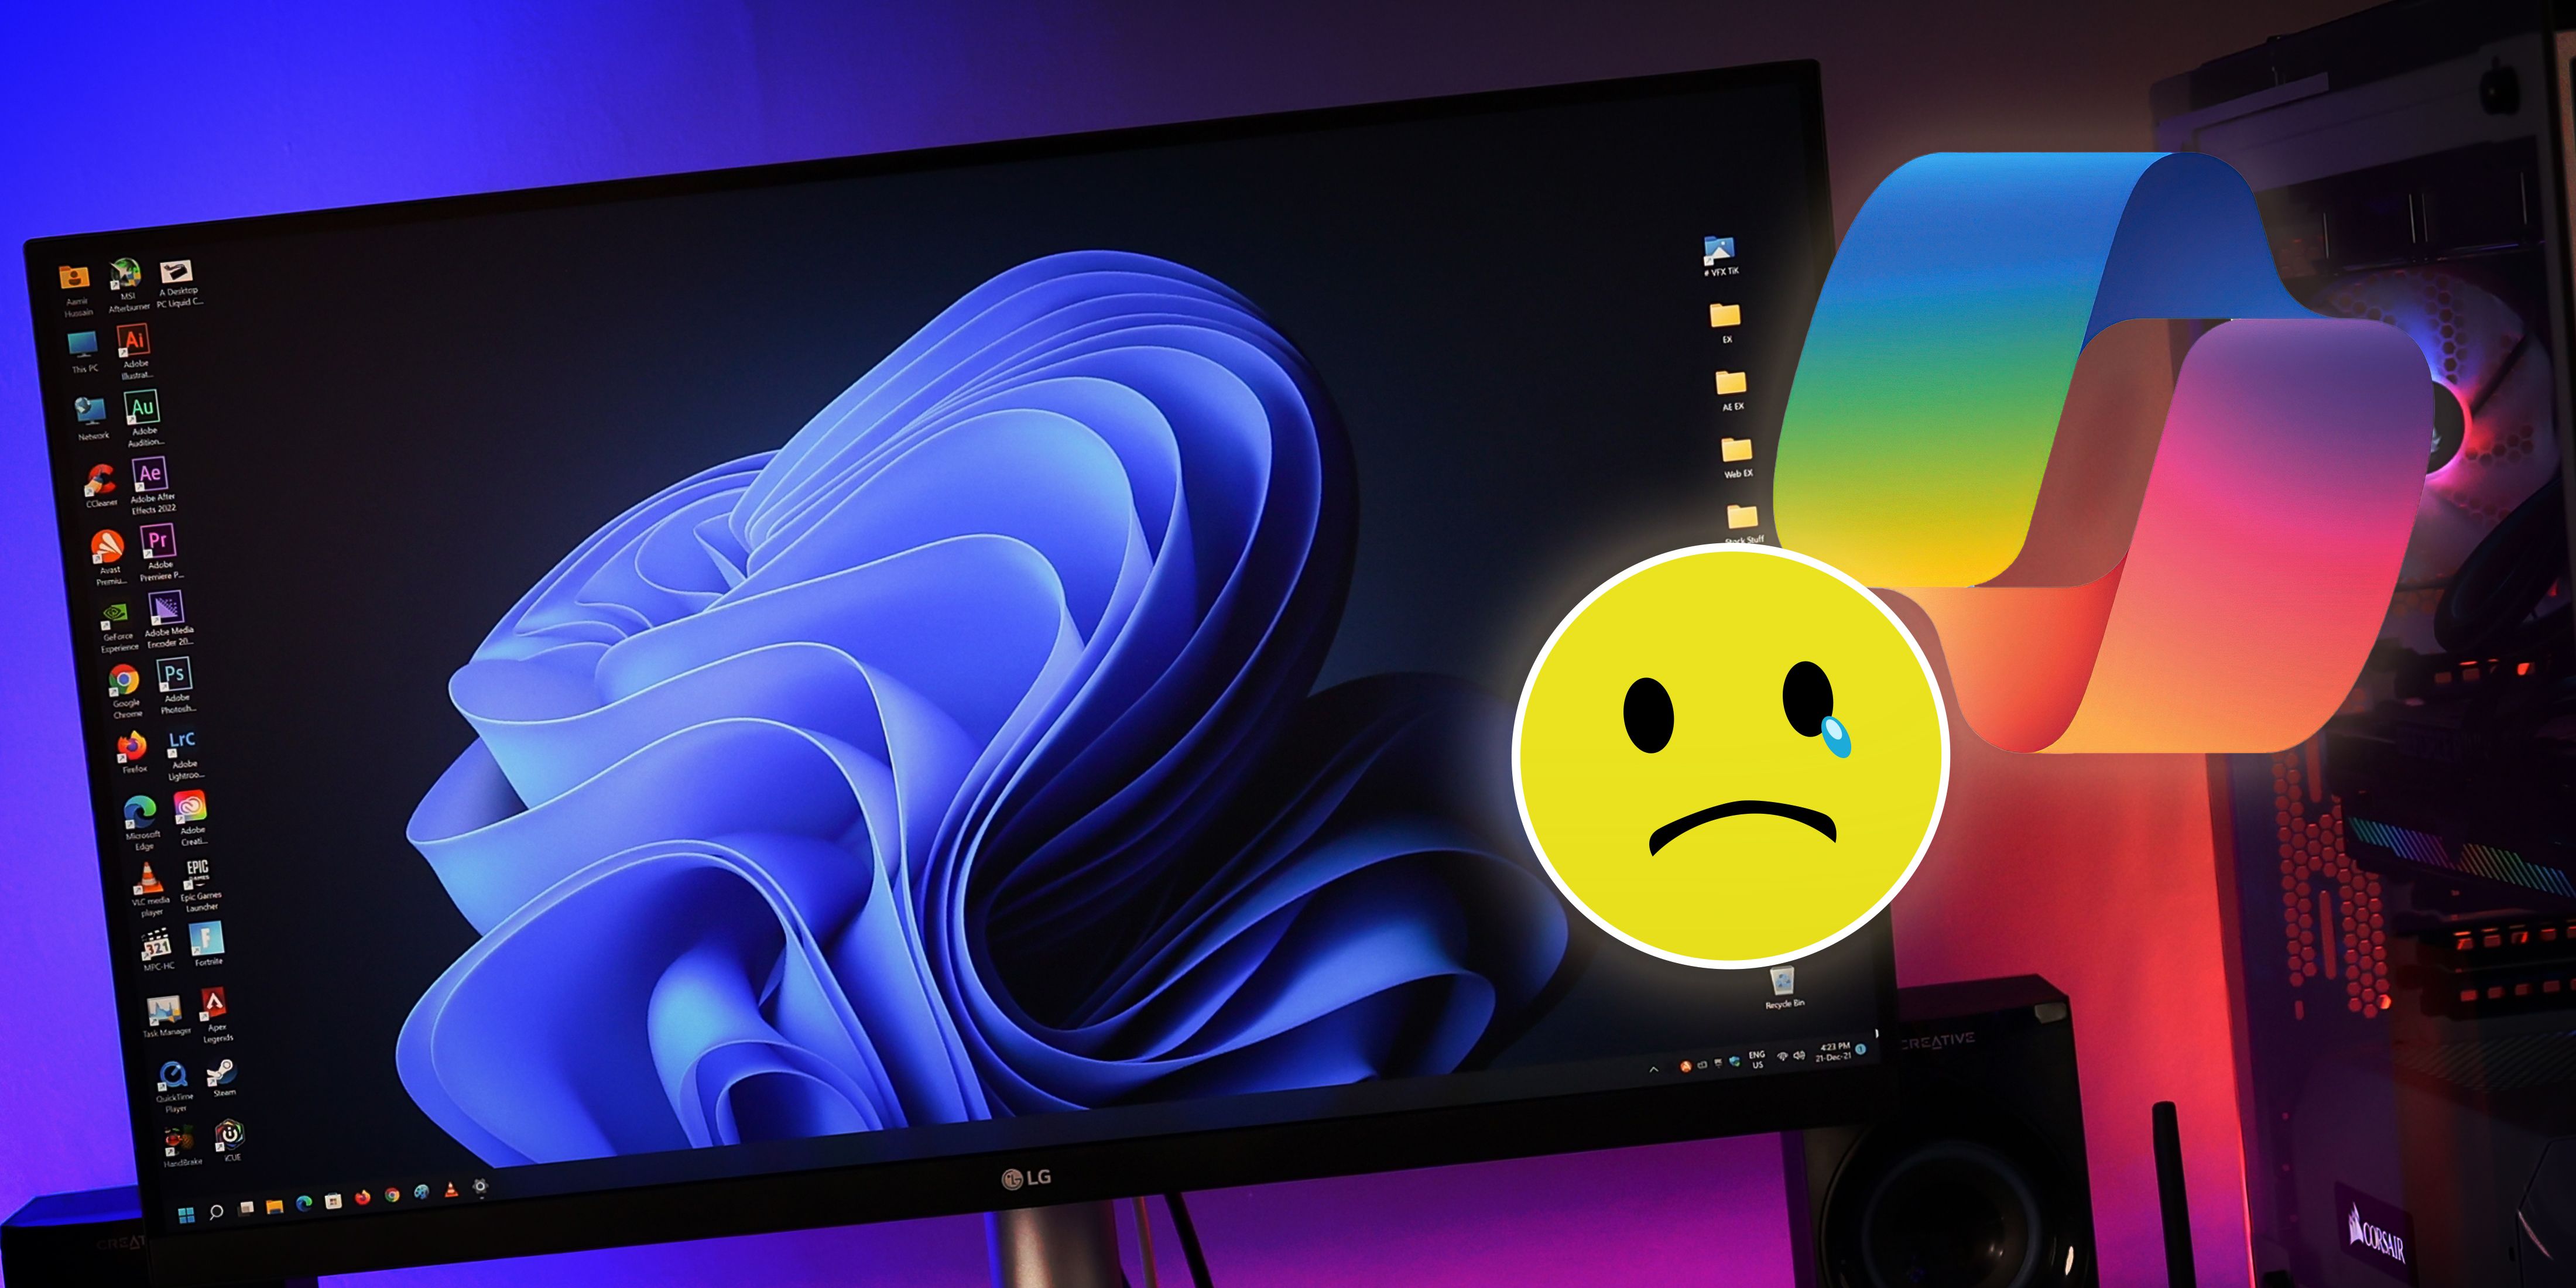 A PC setup with a large monitor displaying Windows 11 wallpaper, accompanied by a sad emoticon icon